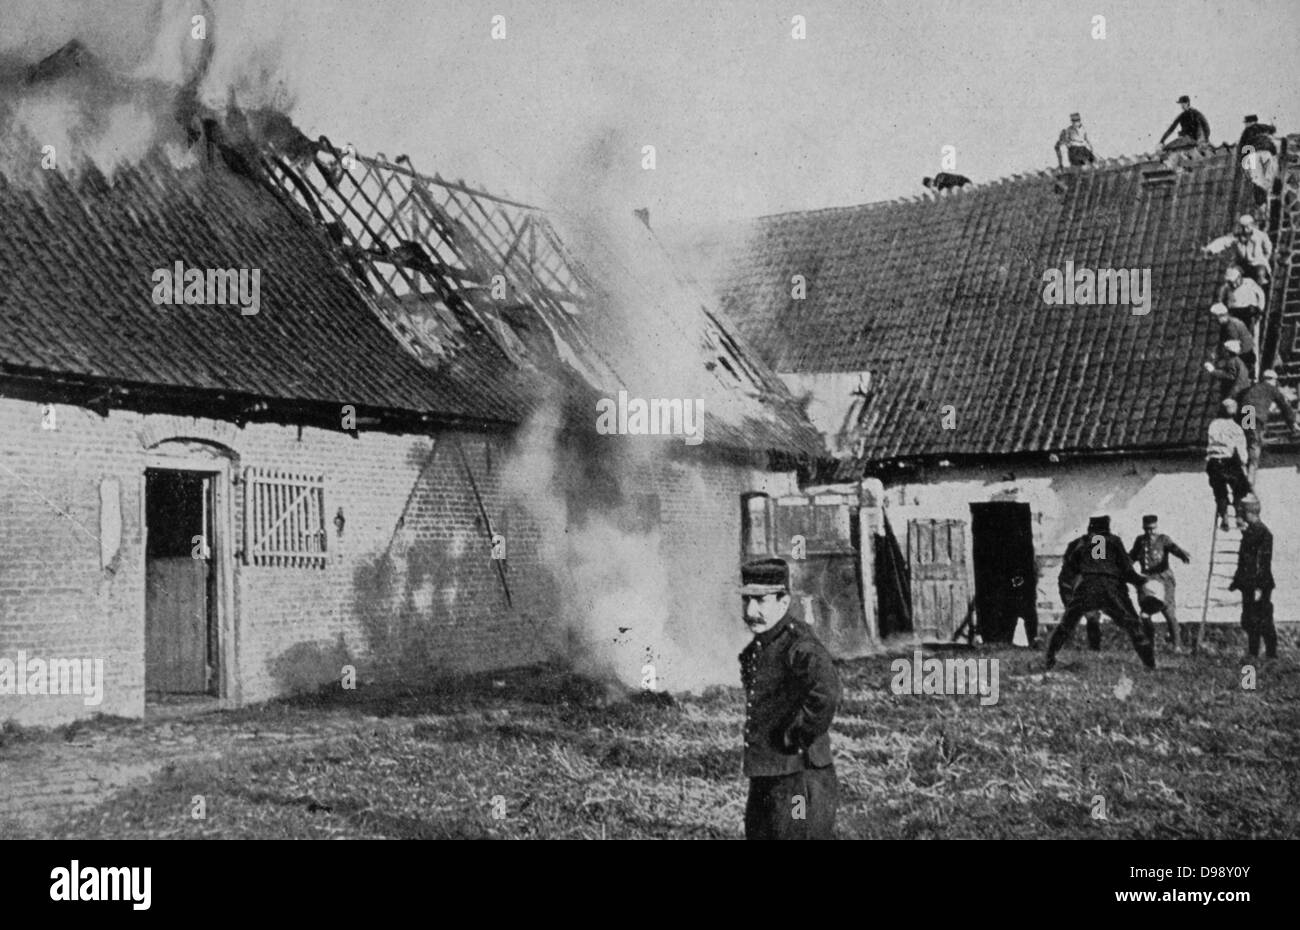 World War I 1914-1918: Fighting a fire on a farm in Artois, France, set alight by German shellfire. Being on the front line between German and Allied forces the area suffered severe damage. From 'Le Flambeau', Paris, 18 September 1915. Stock Photo